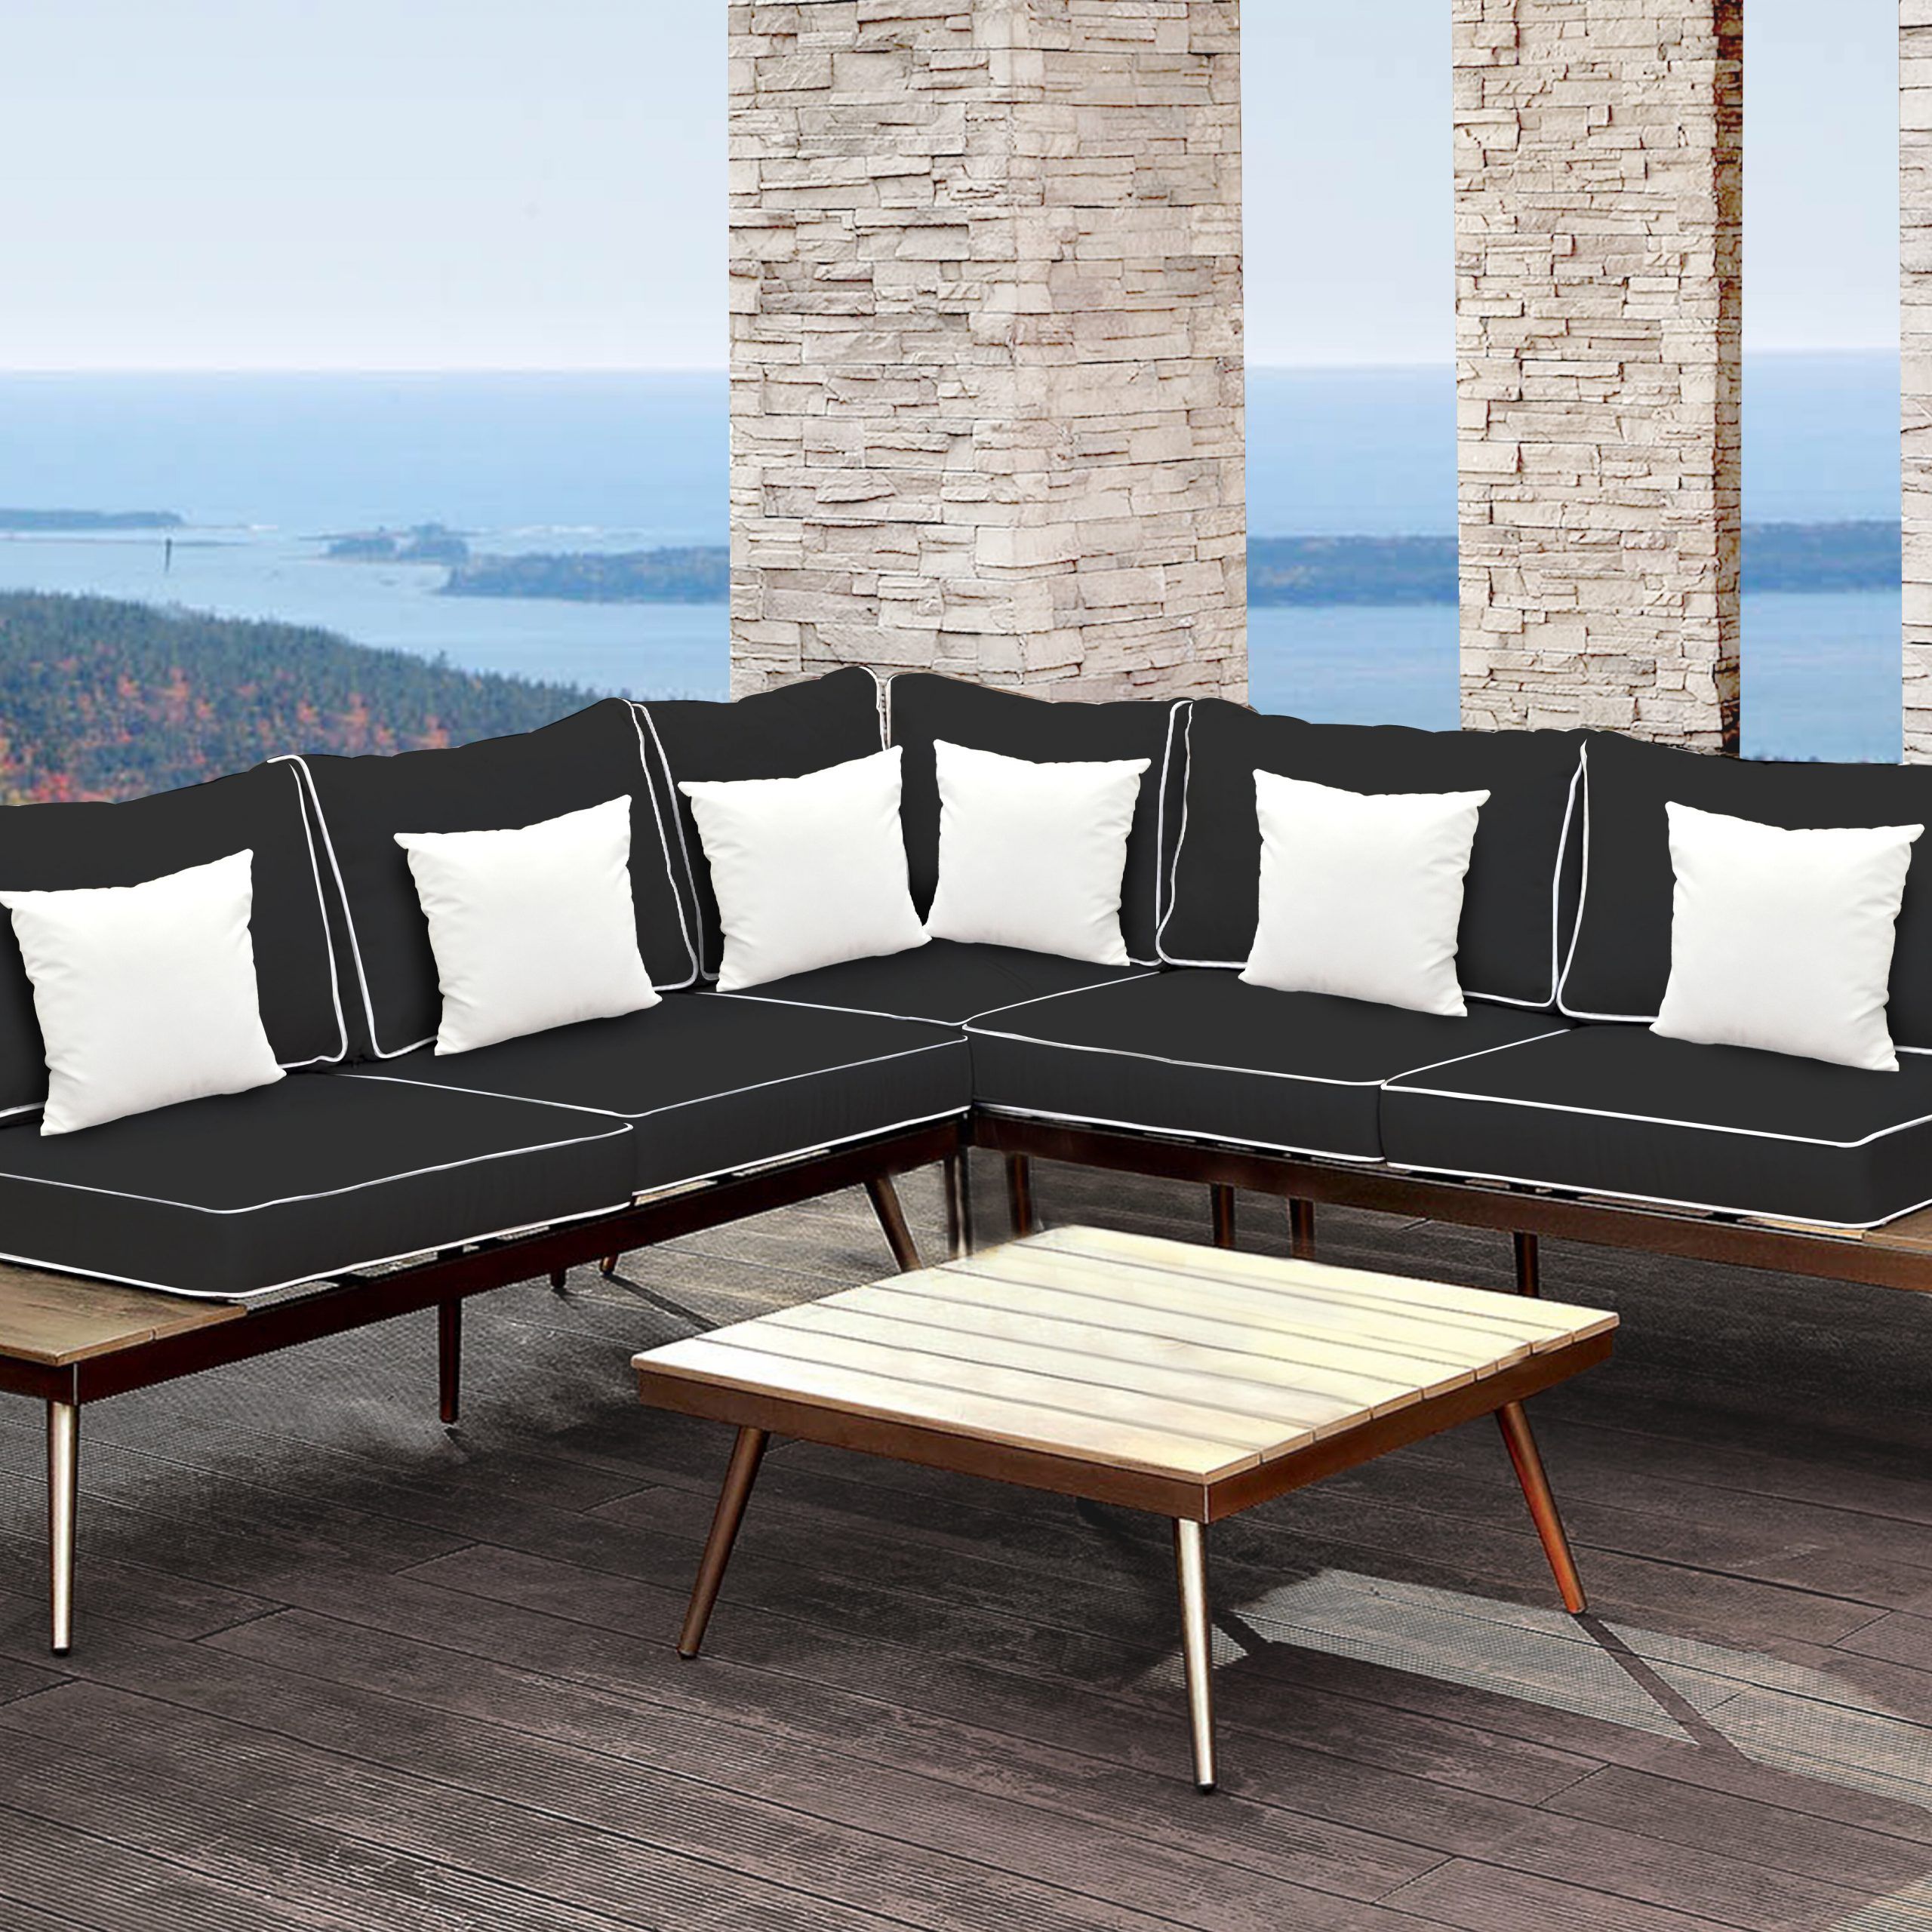 Olinda 3 Piece Sectionals Seating Group With Cushions Within Most Recently Released Wisner 3 Piece Sectional Seating Group With Cushions (View 3 of 25)